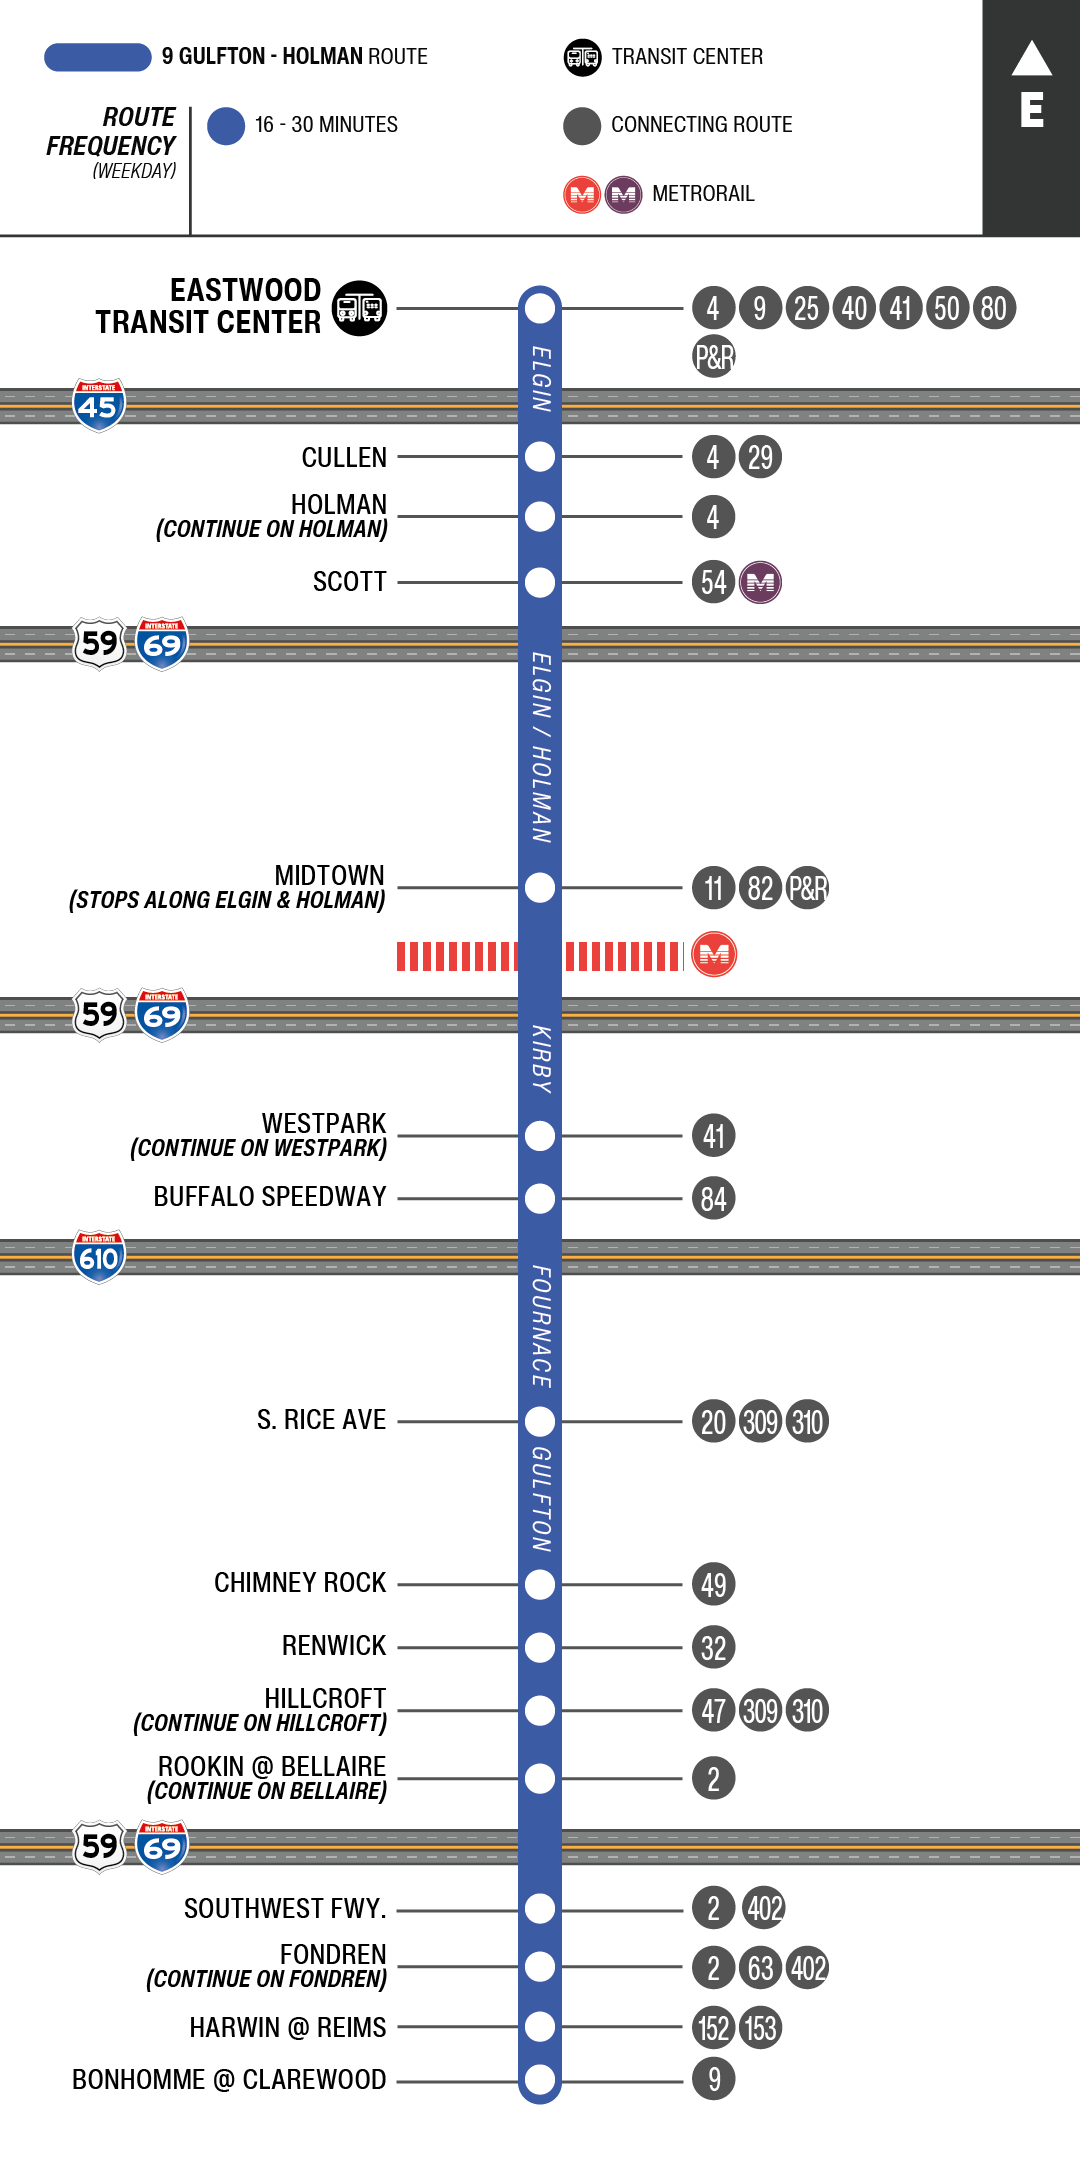 Route map for 9 Gulfton / Holman bus